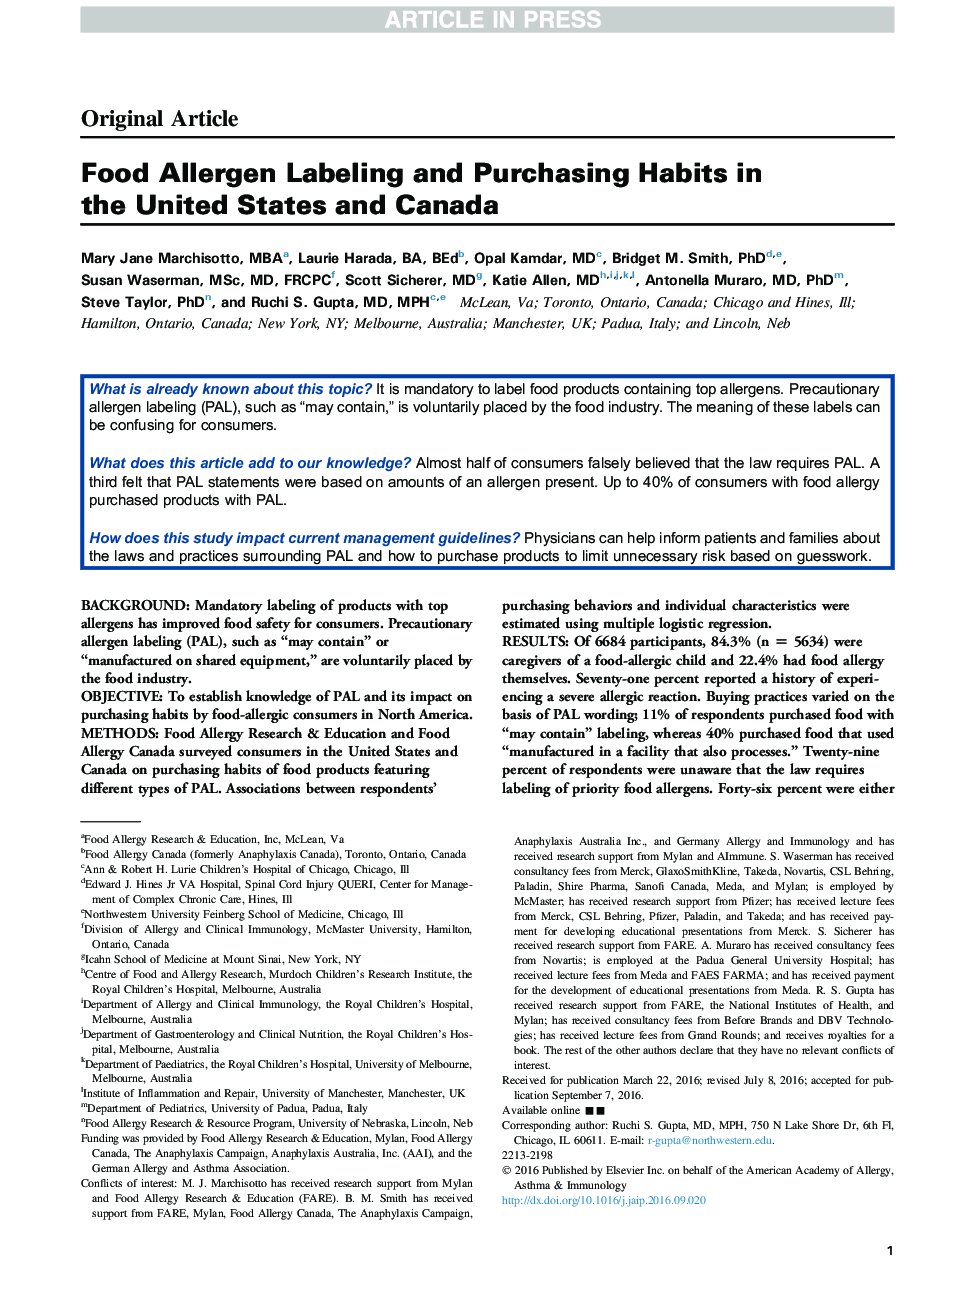 Food Allergen Labeling and Purchasing Habits in the United States and Canada